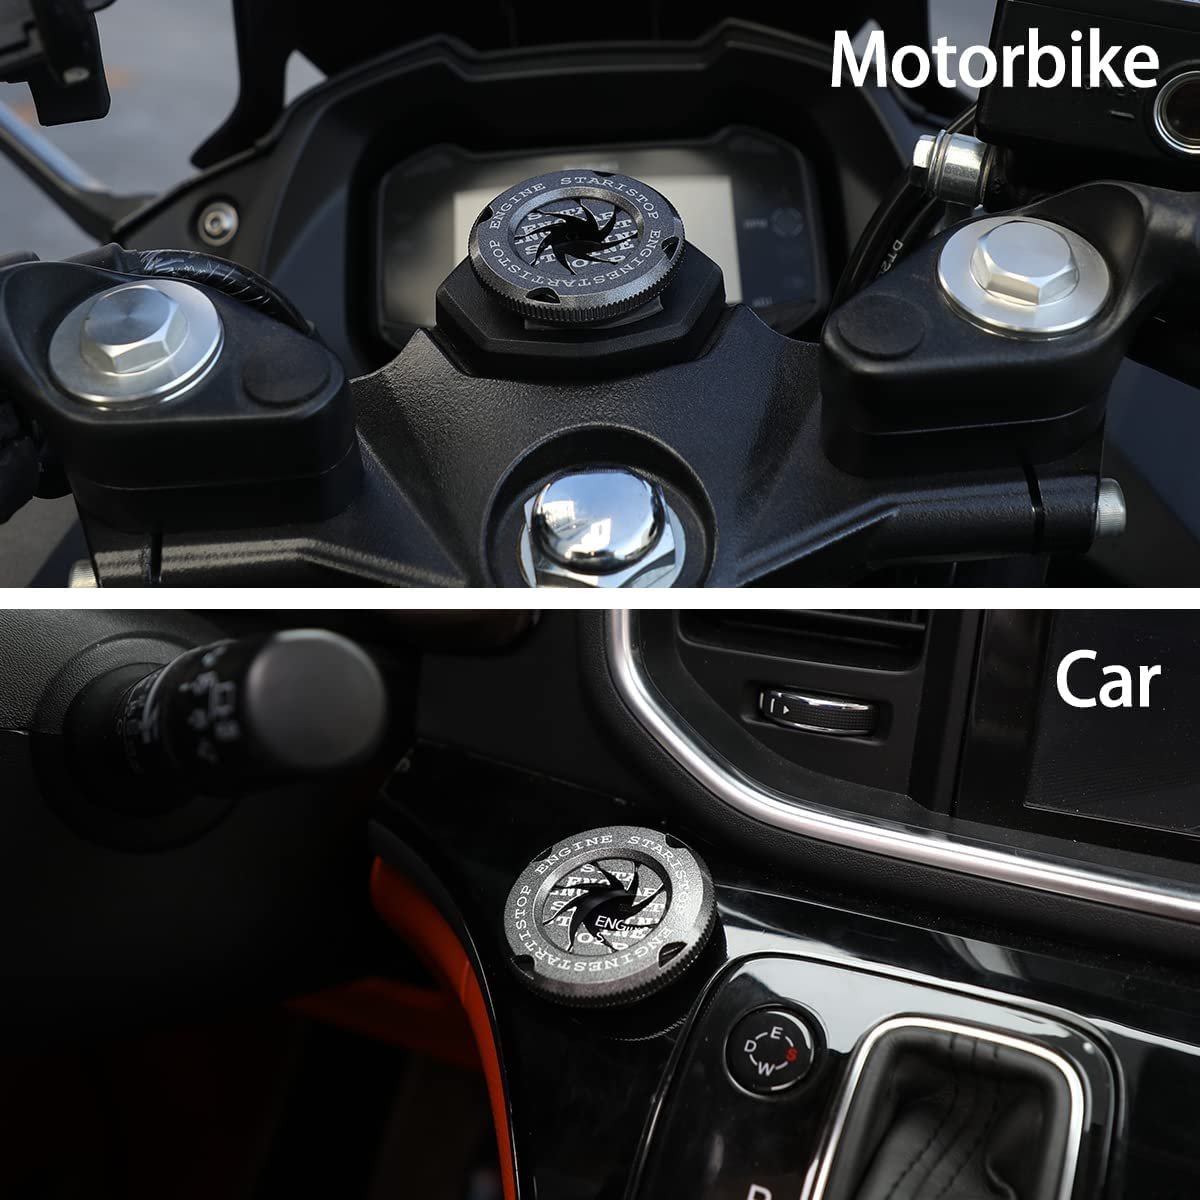 Bike CAR Rotary Engine Start Stop Switch Lambo Style Button Cover Decorative Auto Accessories Push Button Sticky Cover Car Interior (Dragon IC3) Image 